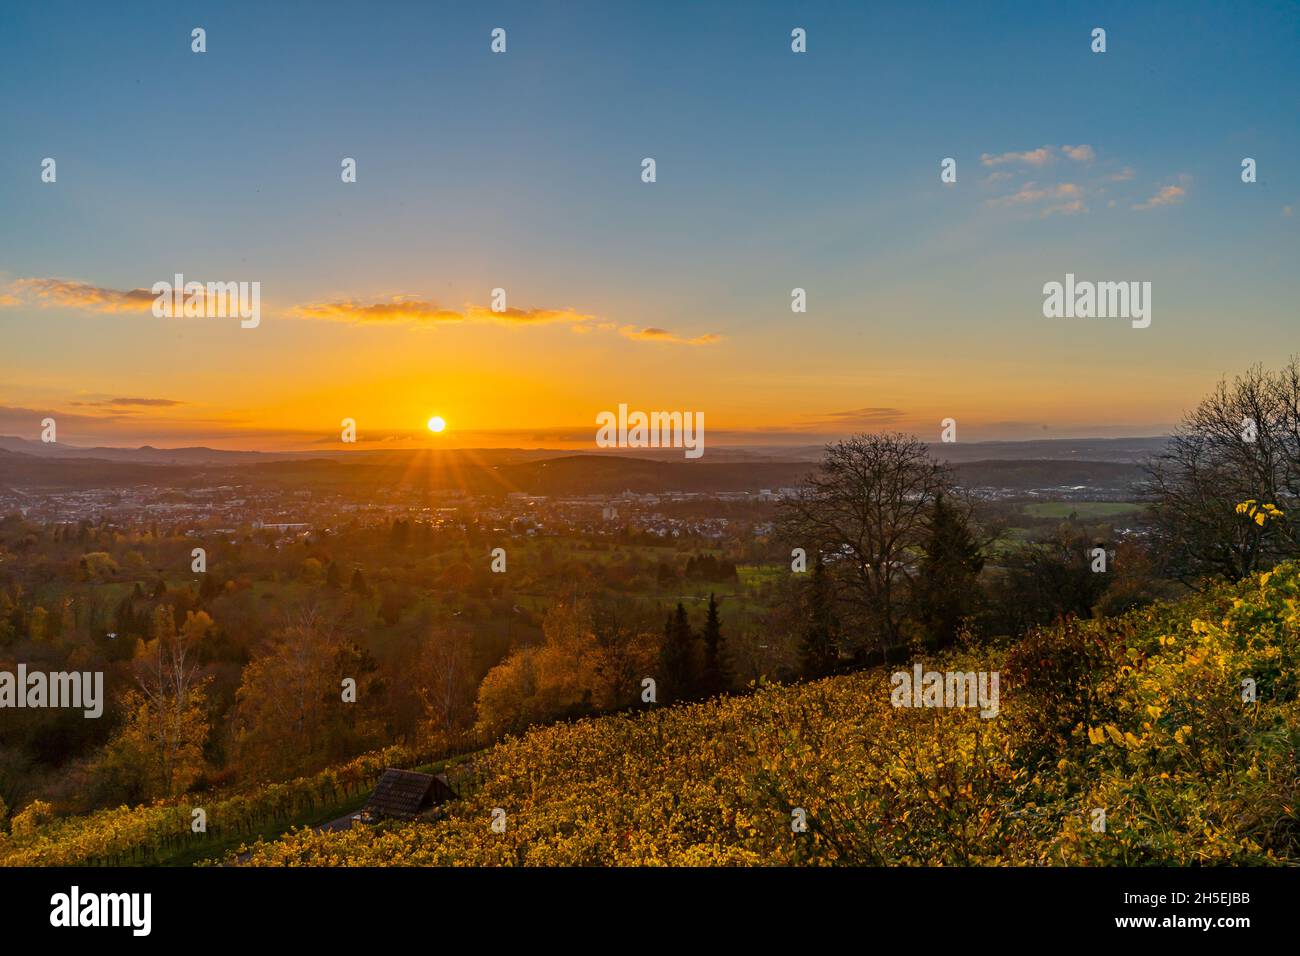 Sunset over Metzingen in autumn with blue skies and bright colors Stock Photo